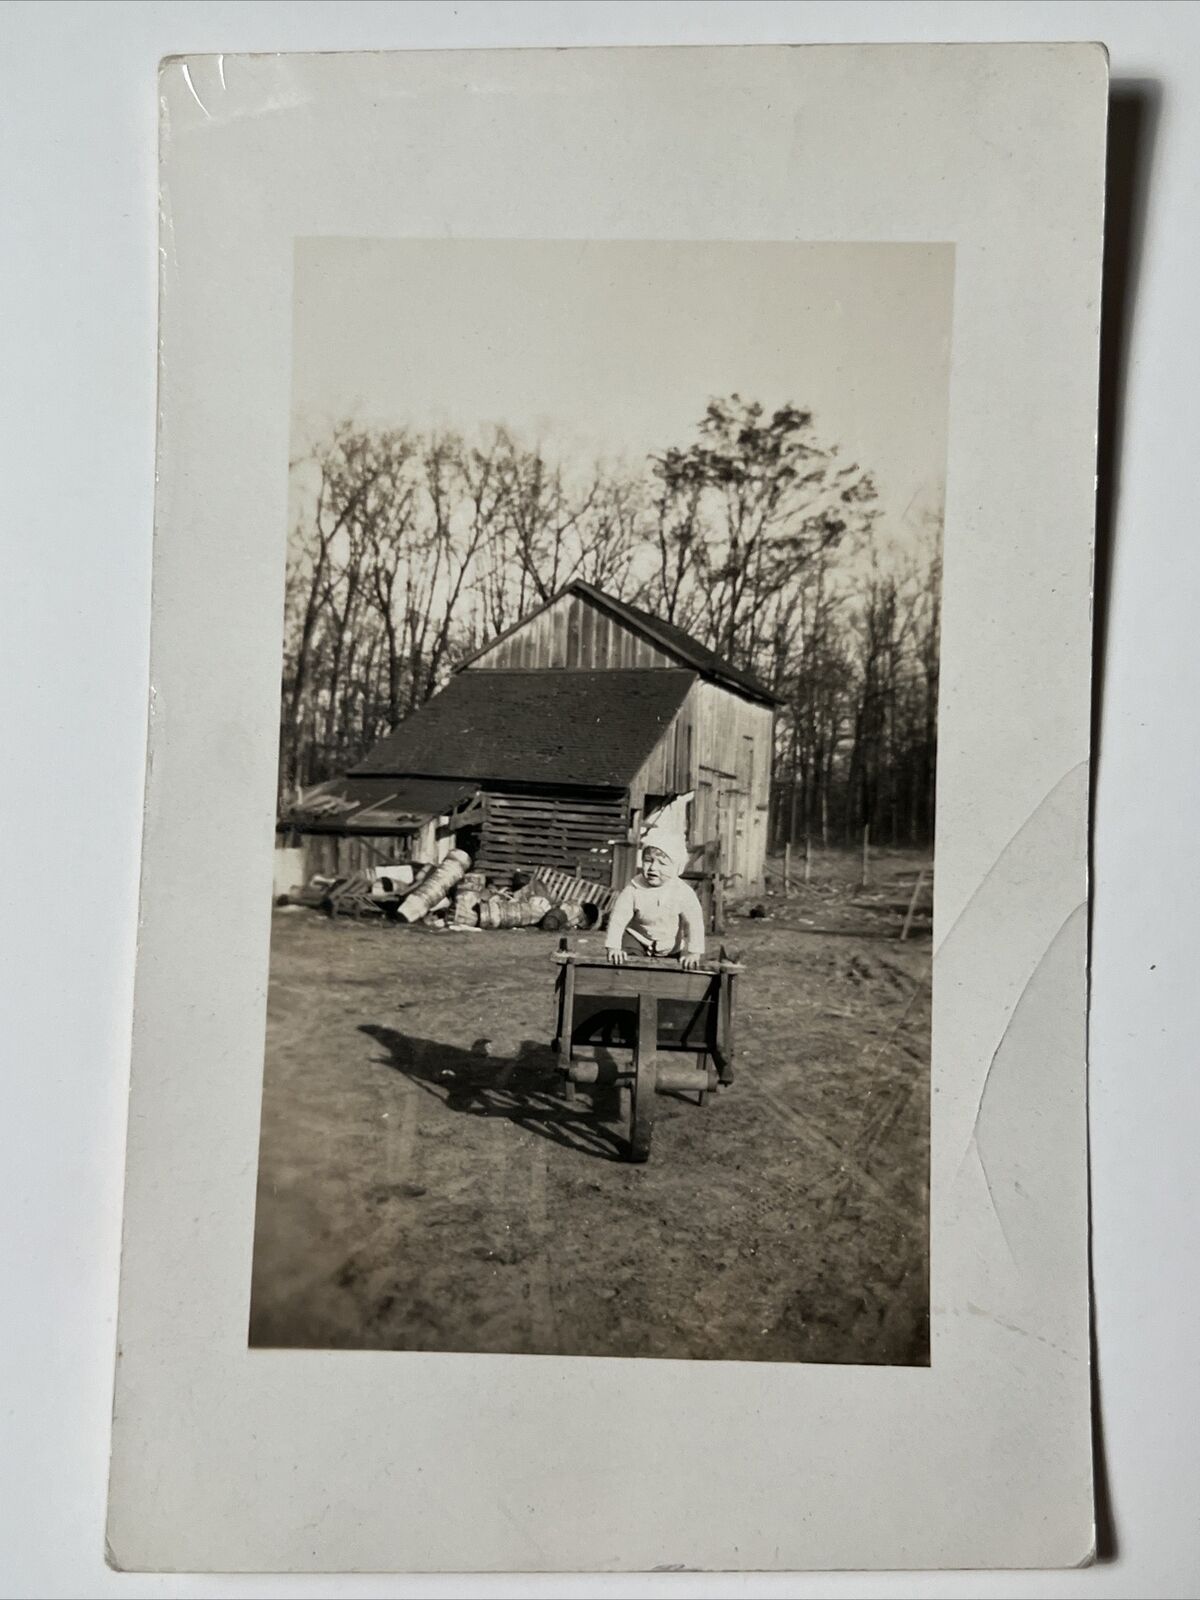 1901 TODDLER Playing on the FARM near old Barn  RPPC Real Photo Postcard